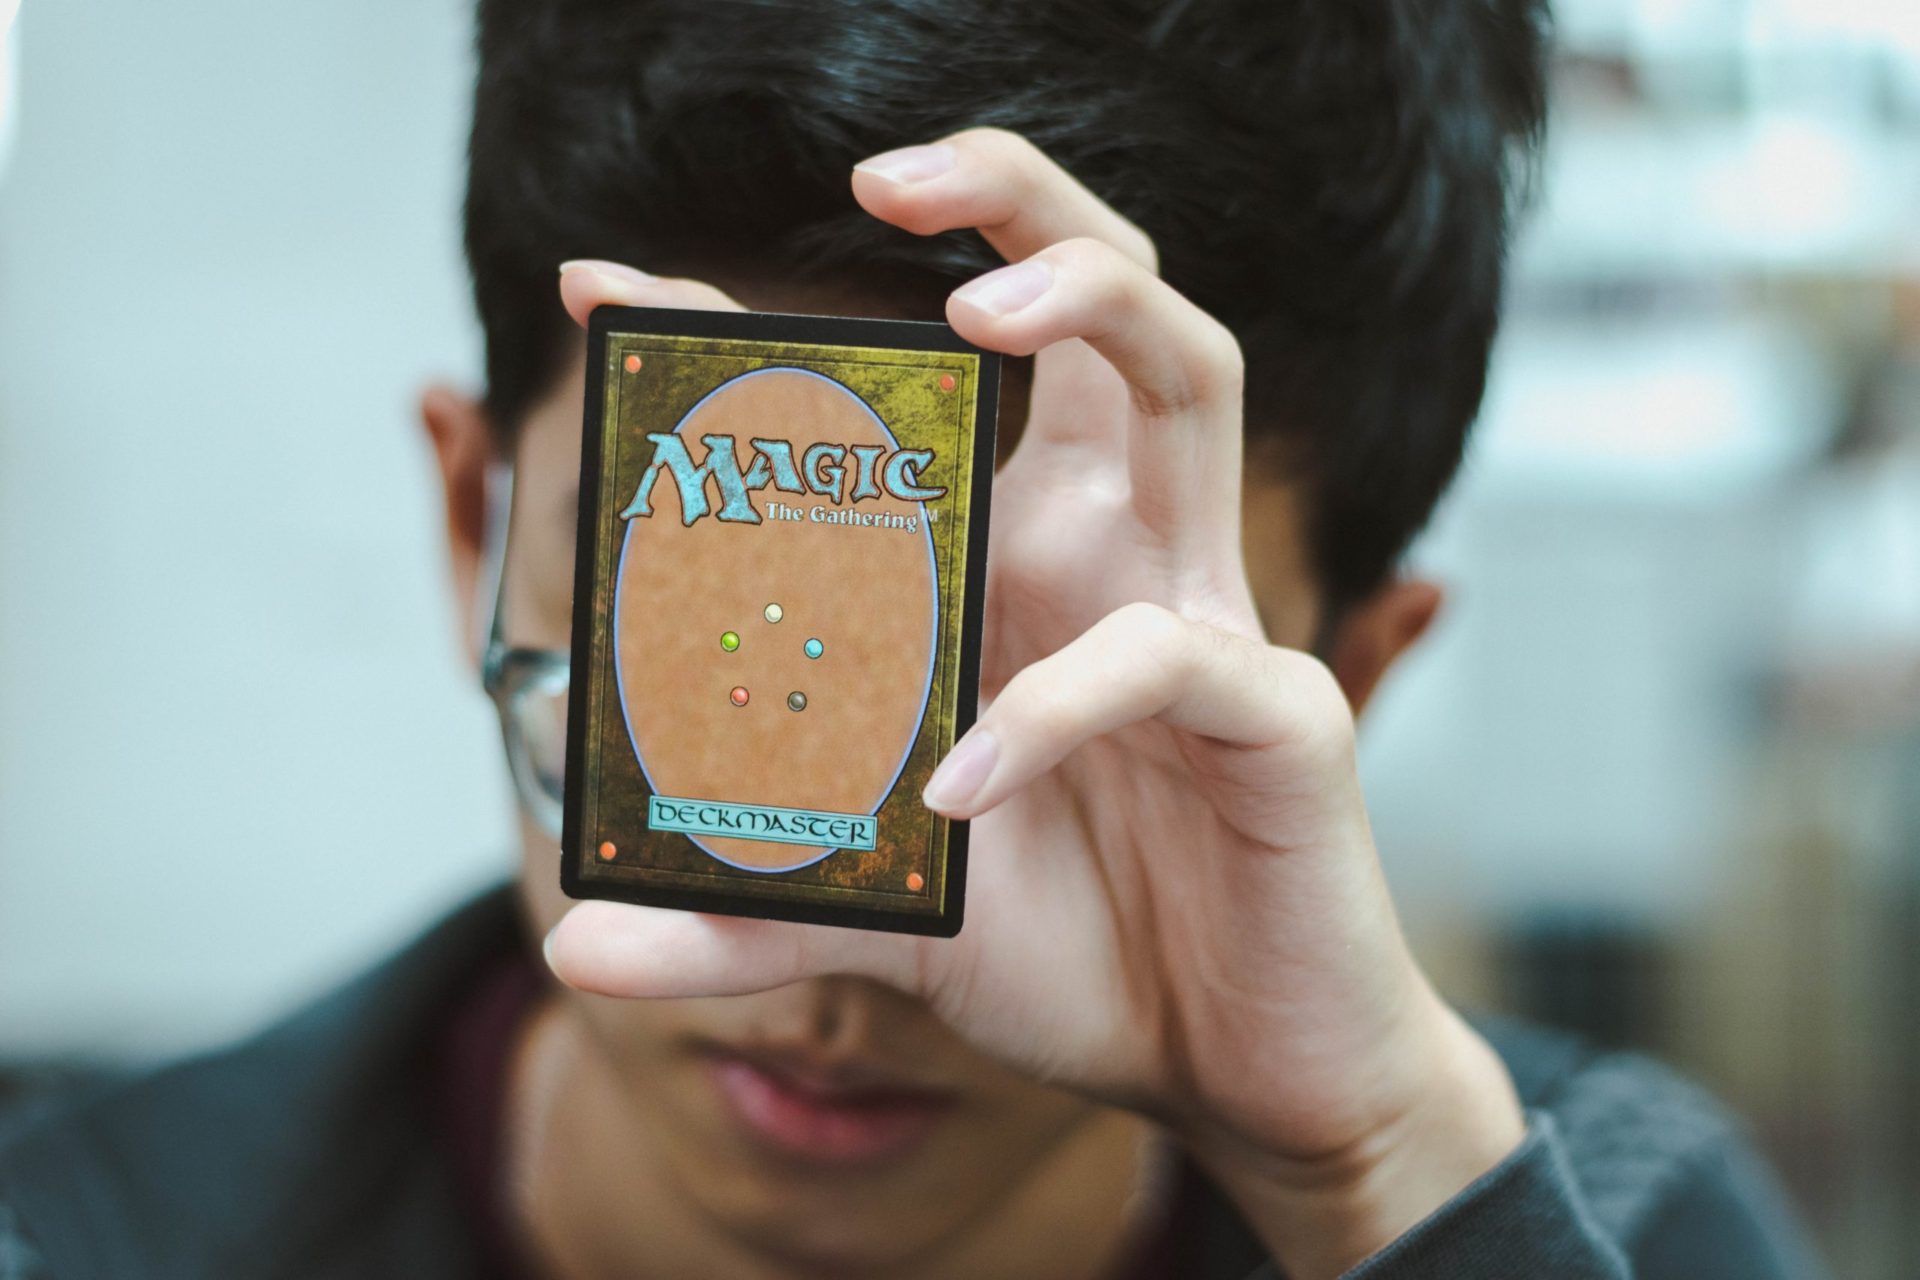 MTG Card Being Held Up By Person Aesthetic Image.